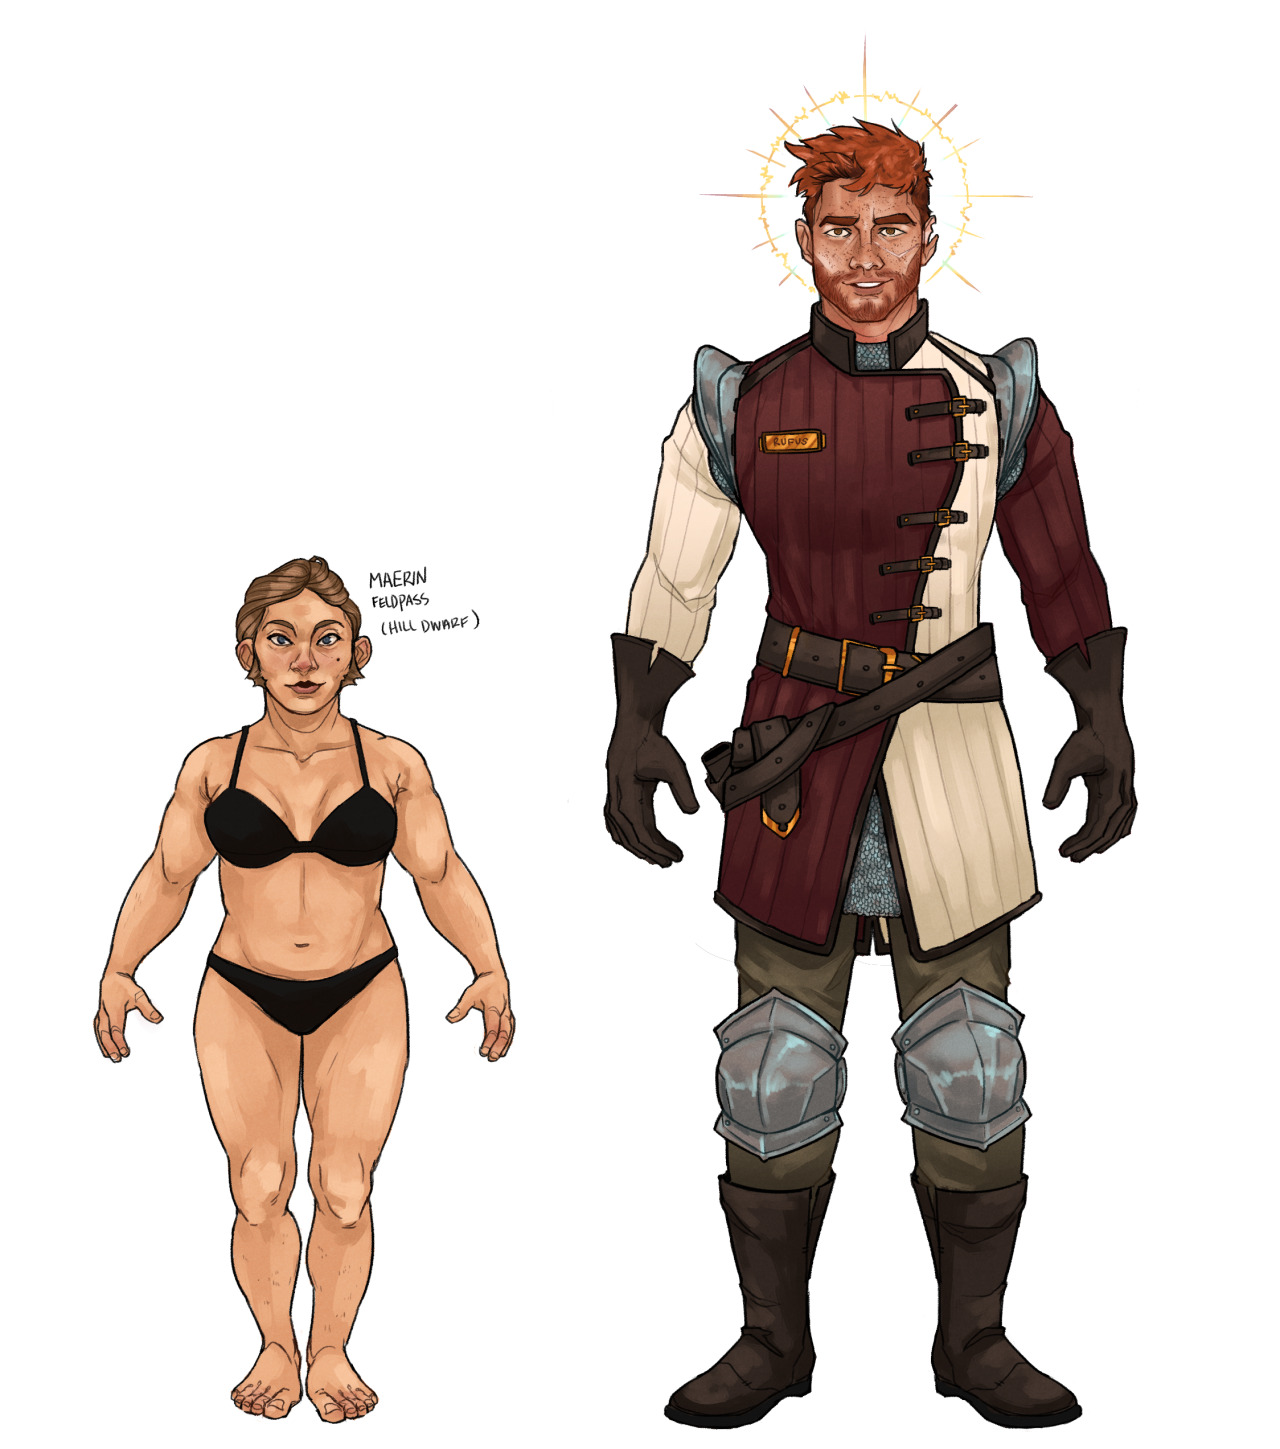 me: keeps making dnd blorbo content Maerin is a Dwarf Battlemaster Fighter (Longbow! So Dex fighter) I’ve been wanting to play for a while. So time to make a ref sheet. Rufus is here for height comparison, she’s 4′1′’ and he’s just tall. #my art#wip #fun for anatomy practice  #and like skin tones  #she has yellow/warm bases and he’s more pale and pink